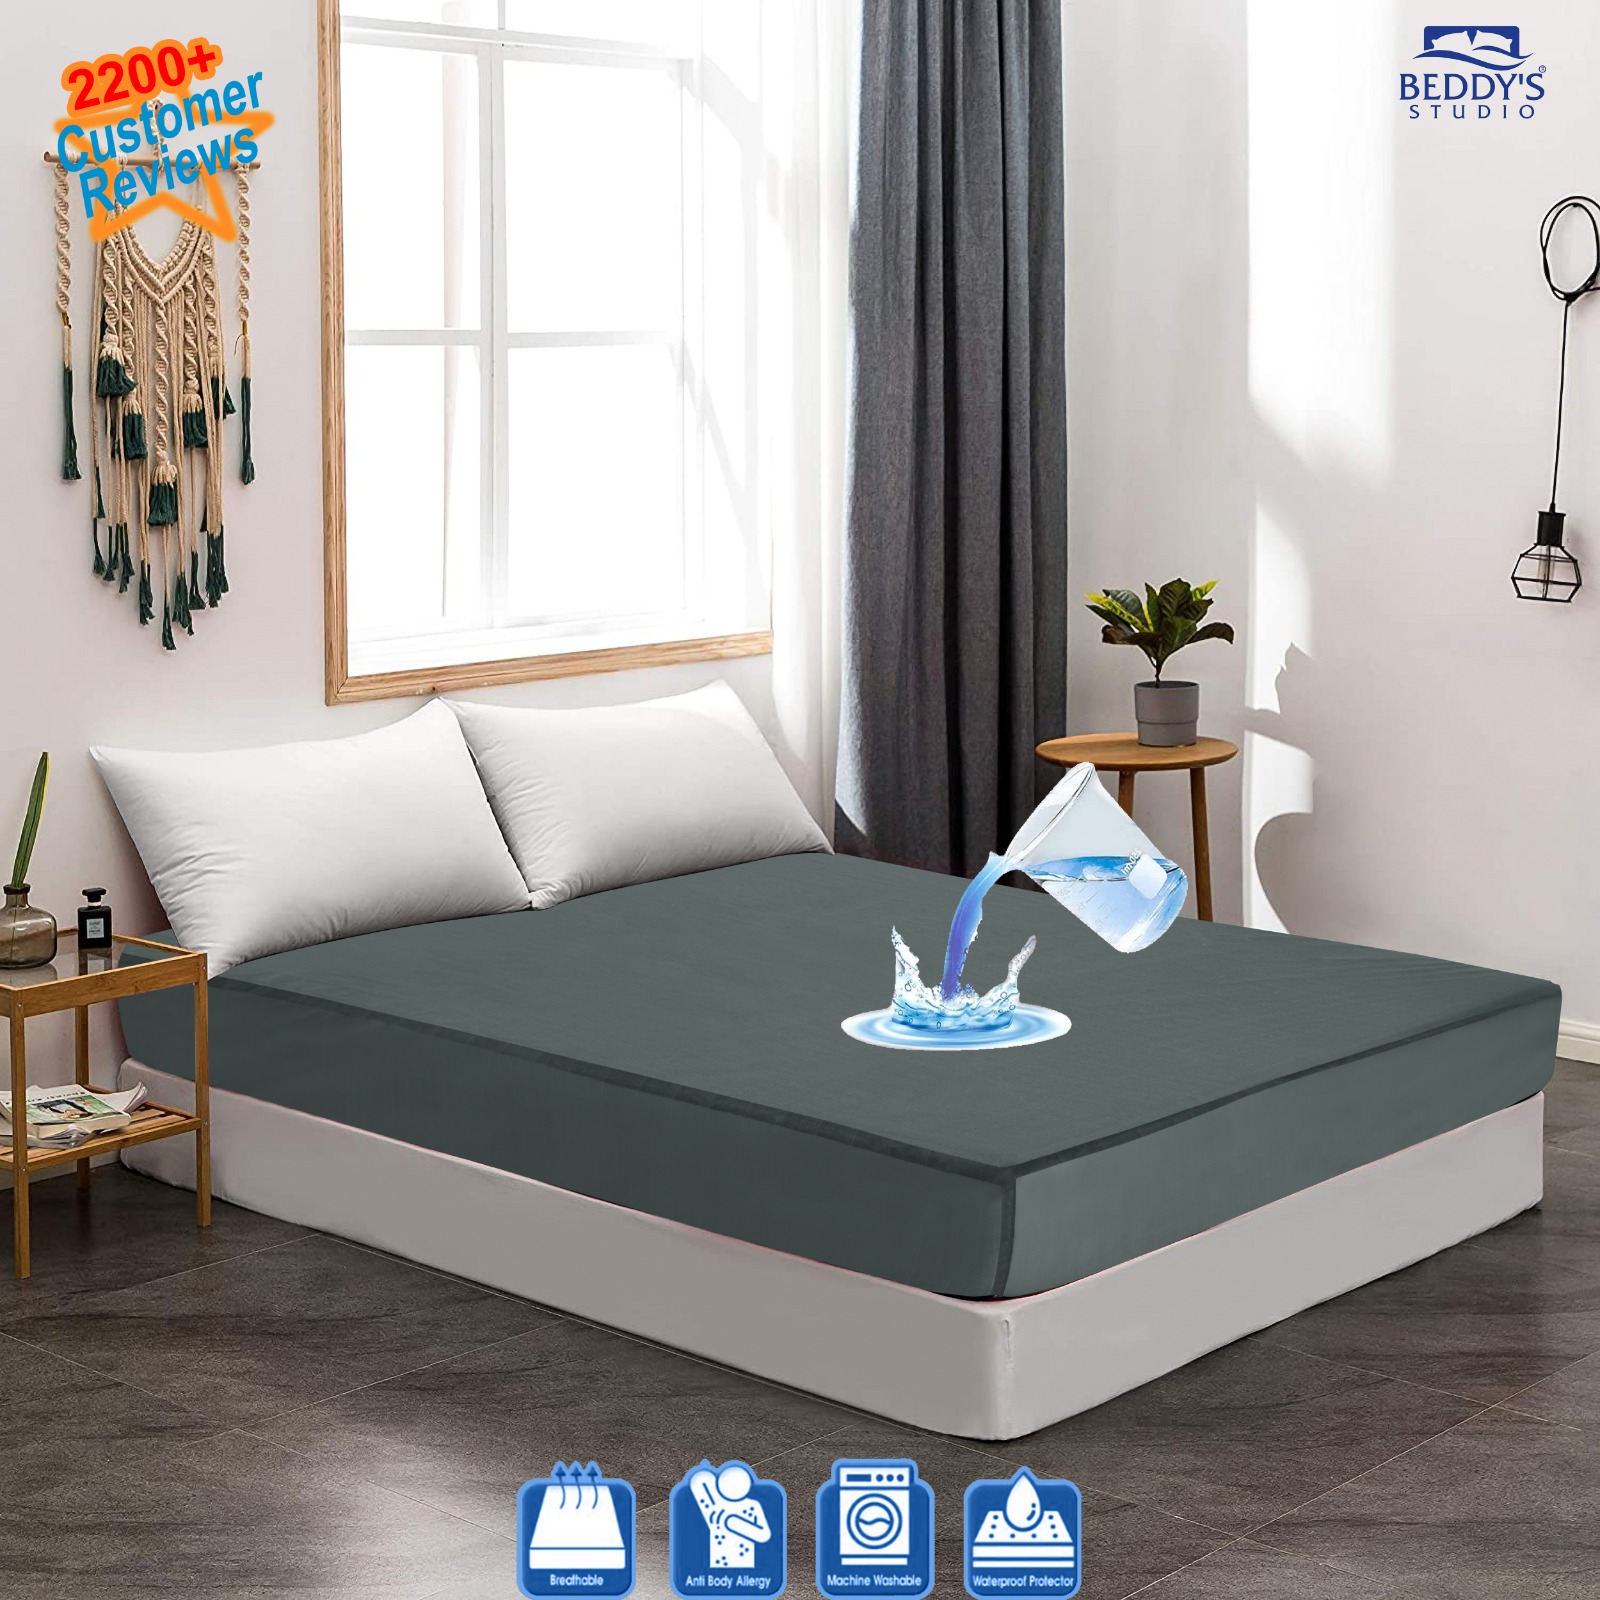 waterproof bed cover price